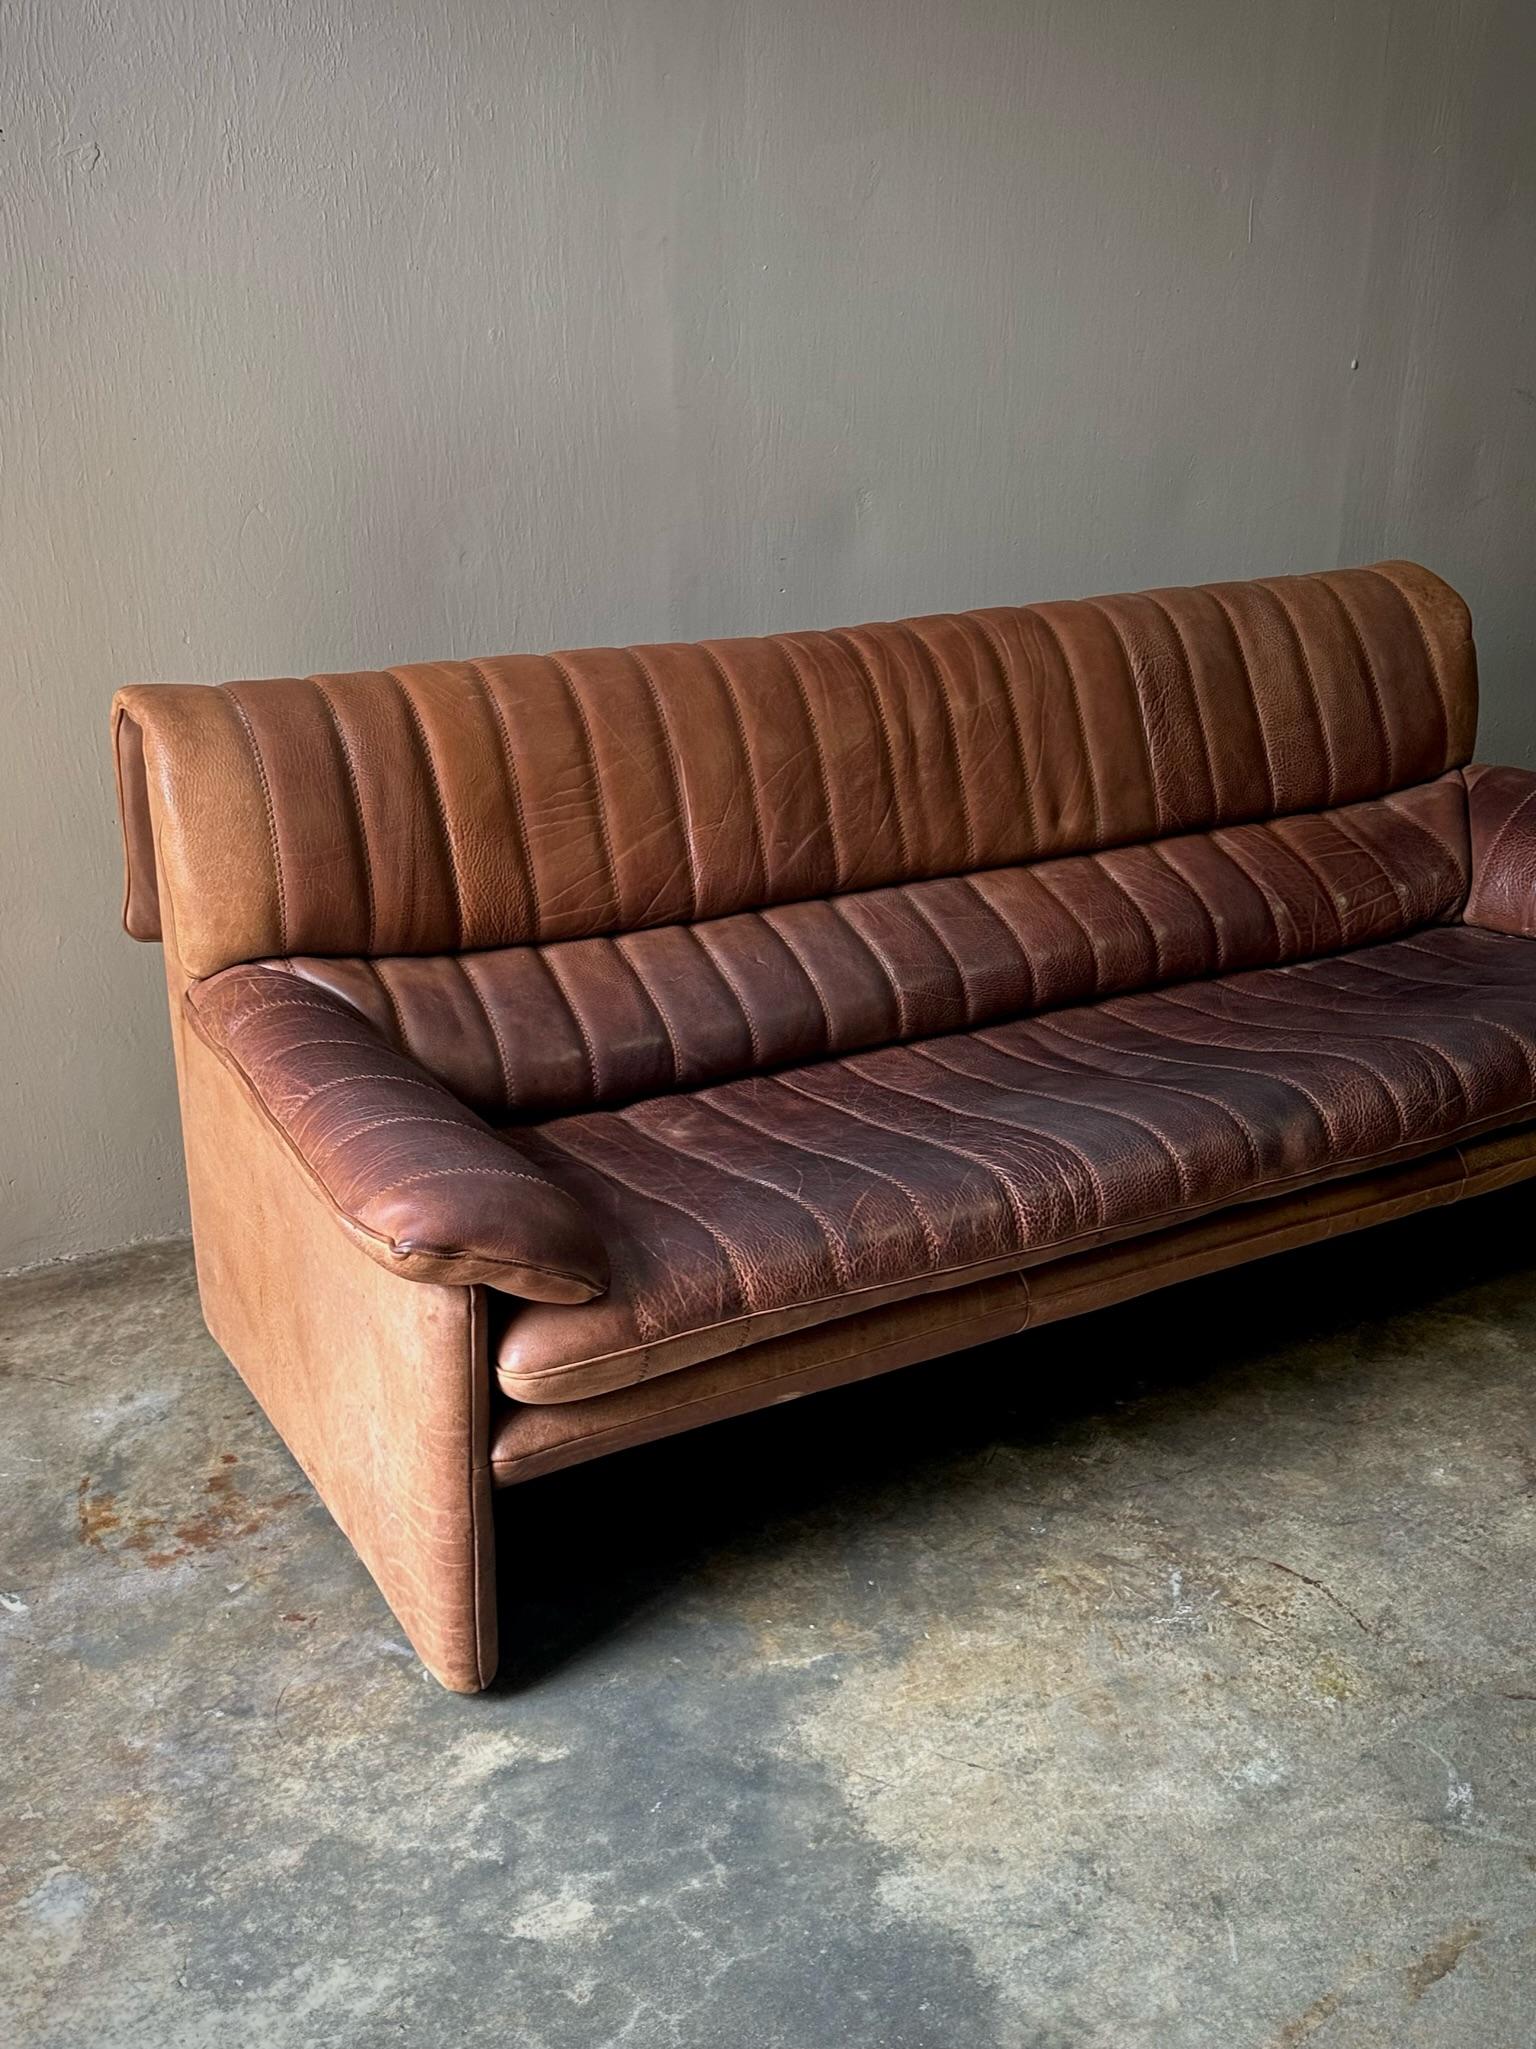 Midcentury well-patinated chestnut leather sofa with stitched vertical striation detailing, by the iconic Swiss design firm de Sede. Classic for a reason. 

Switzerland, circa 1970

Dimensions: 74.8W x 35.4D x 30H